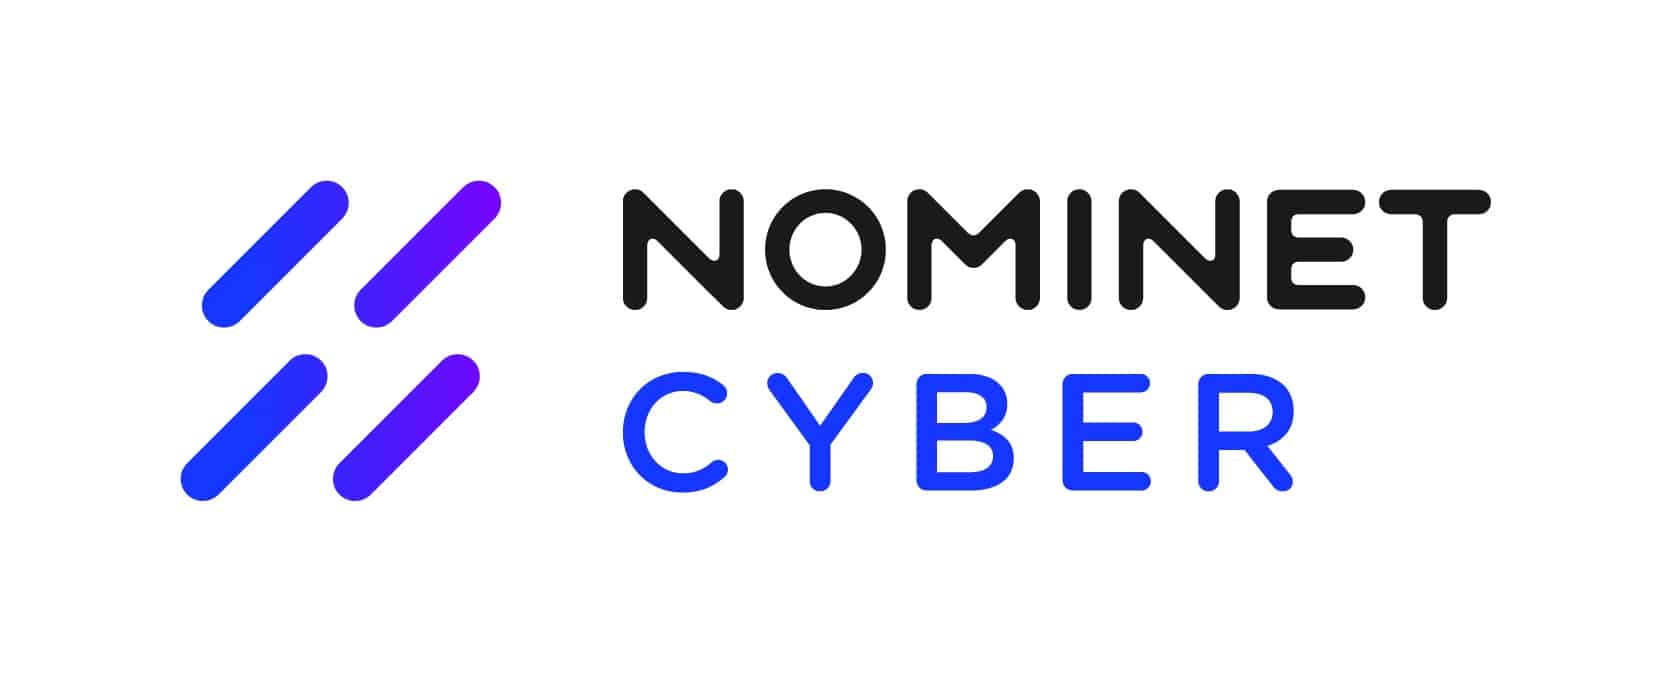 Nominet Cyber